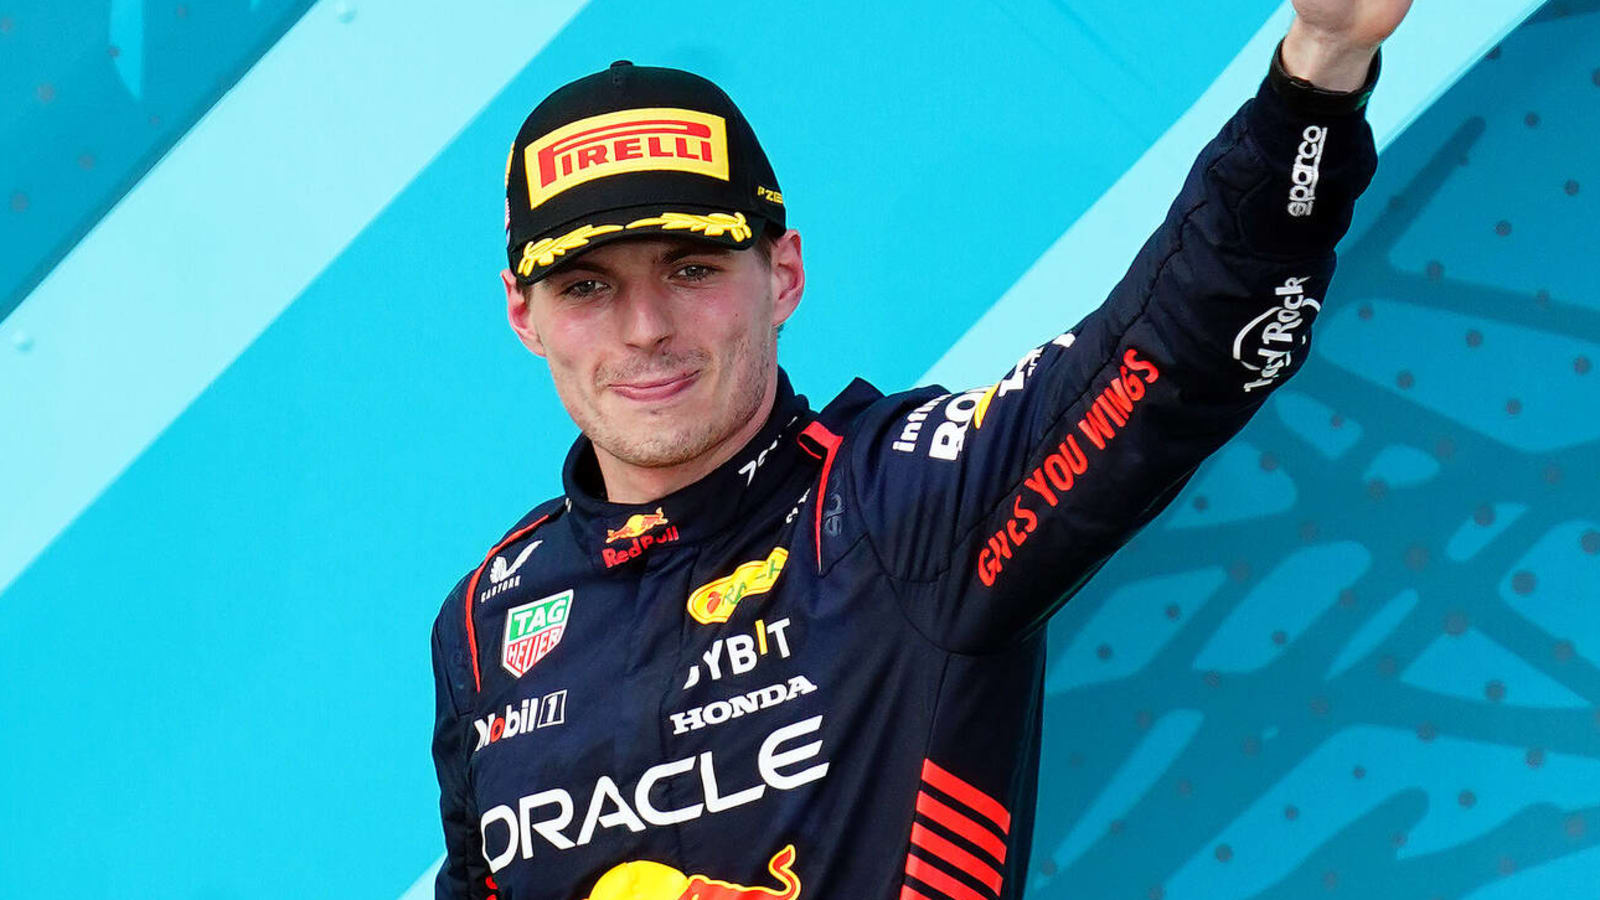 Red Bull dominance continues at Spanish Grand Prix